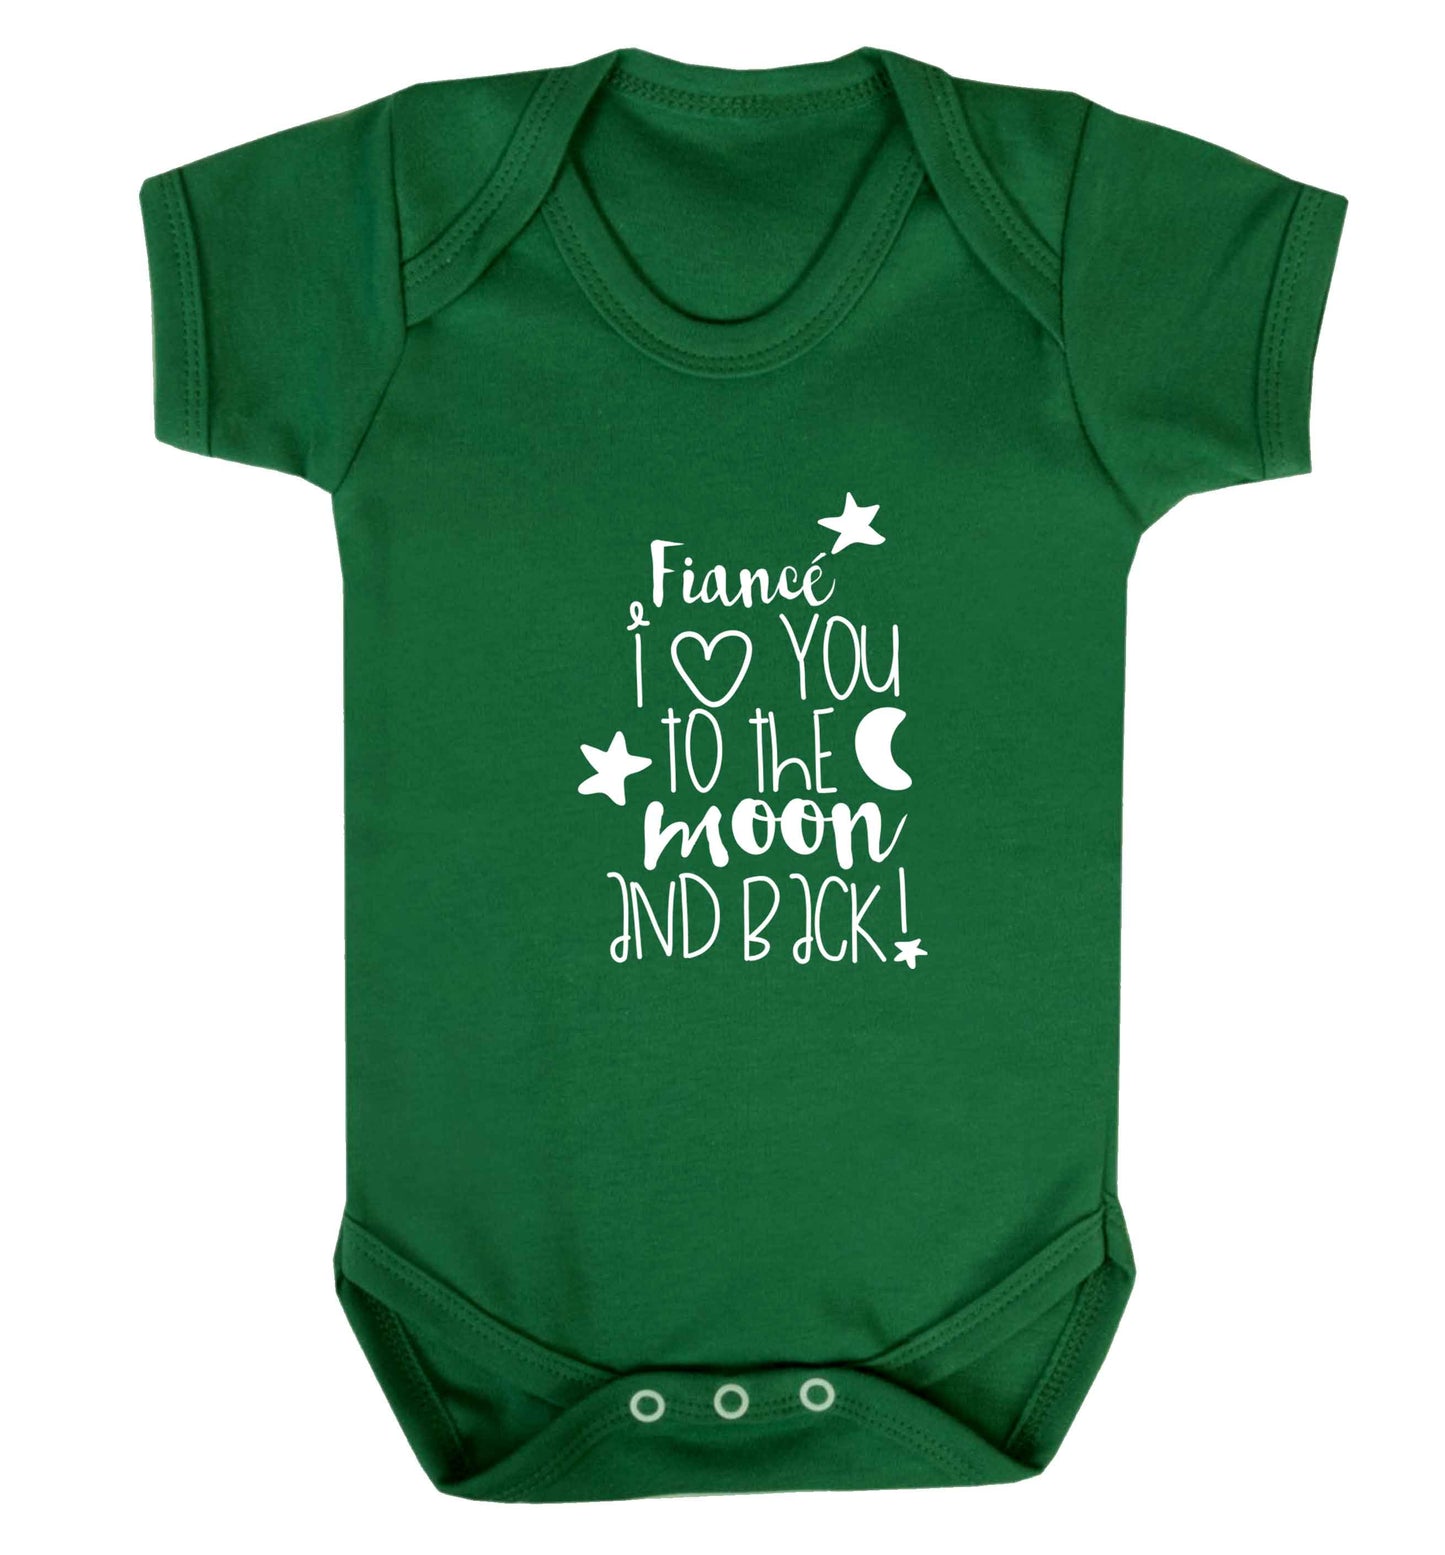 Fianc√© I love you to the moon and back baby vest green 18-24 months